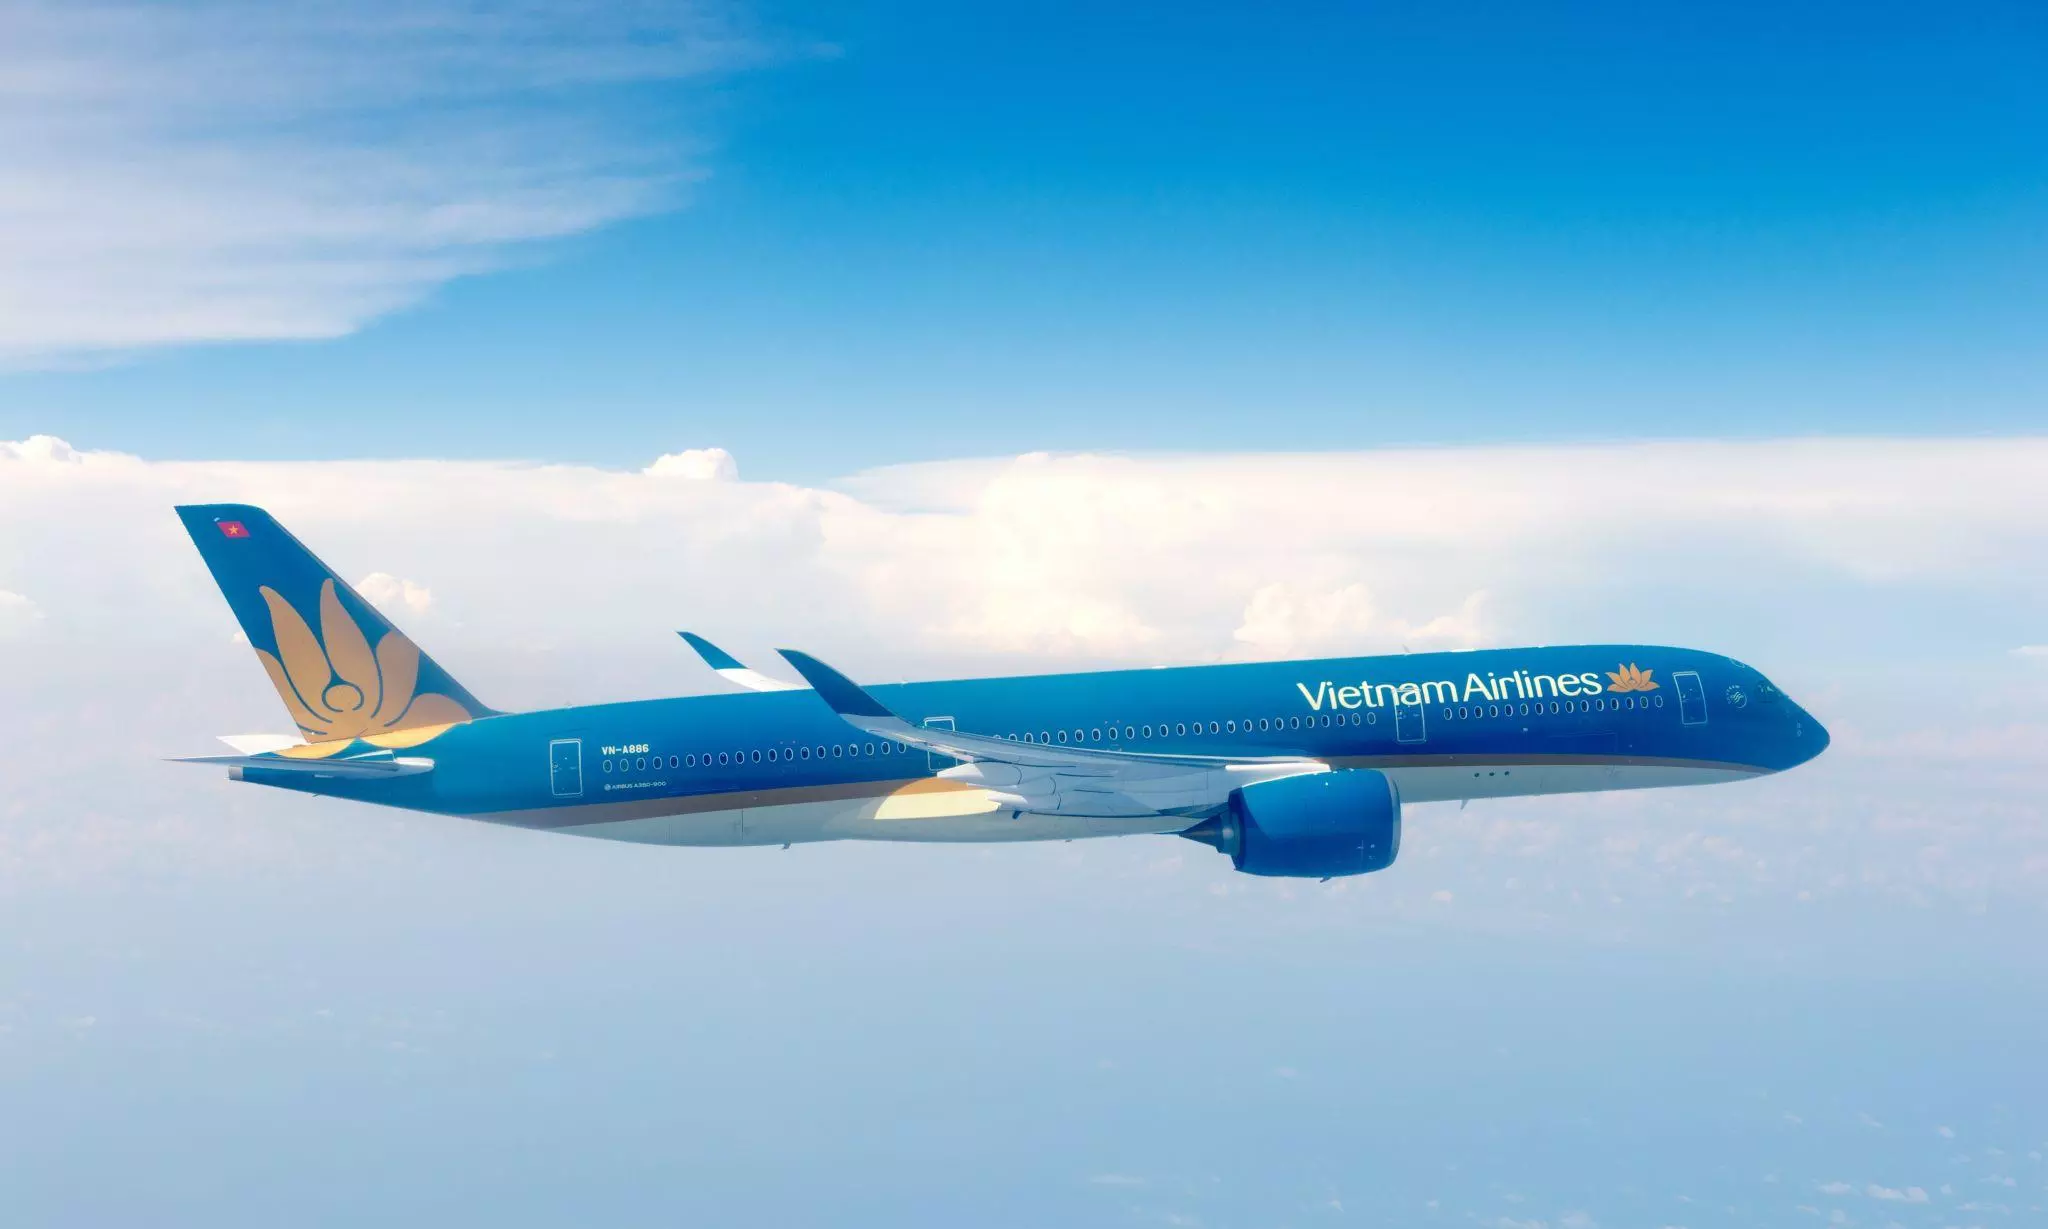 Group Concorde becomes cargo GSA of Vietnam Airlines in India